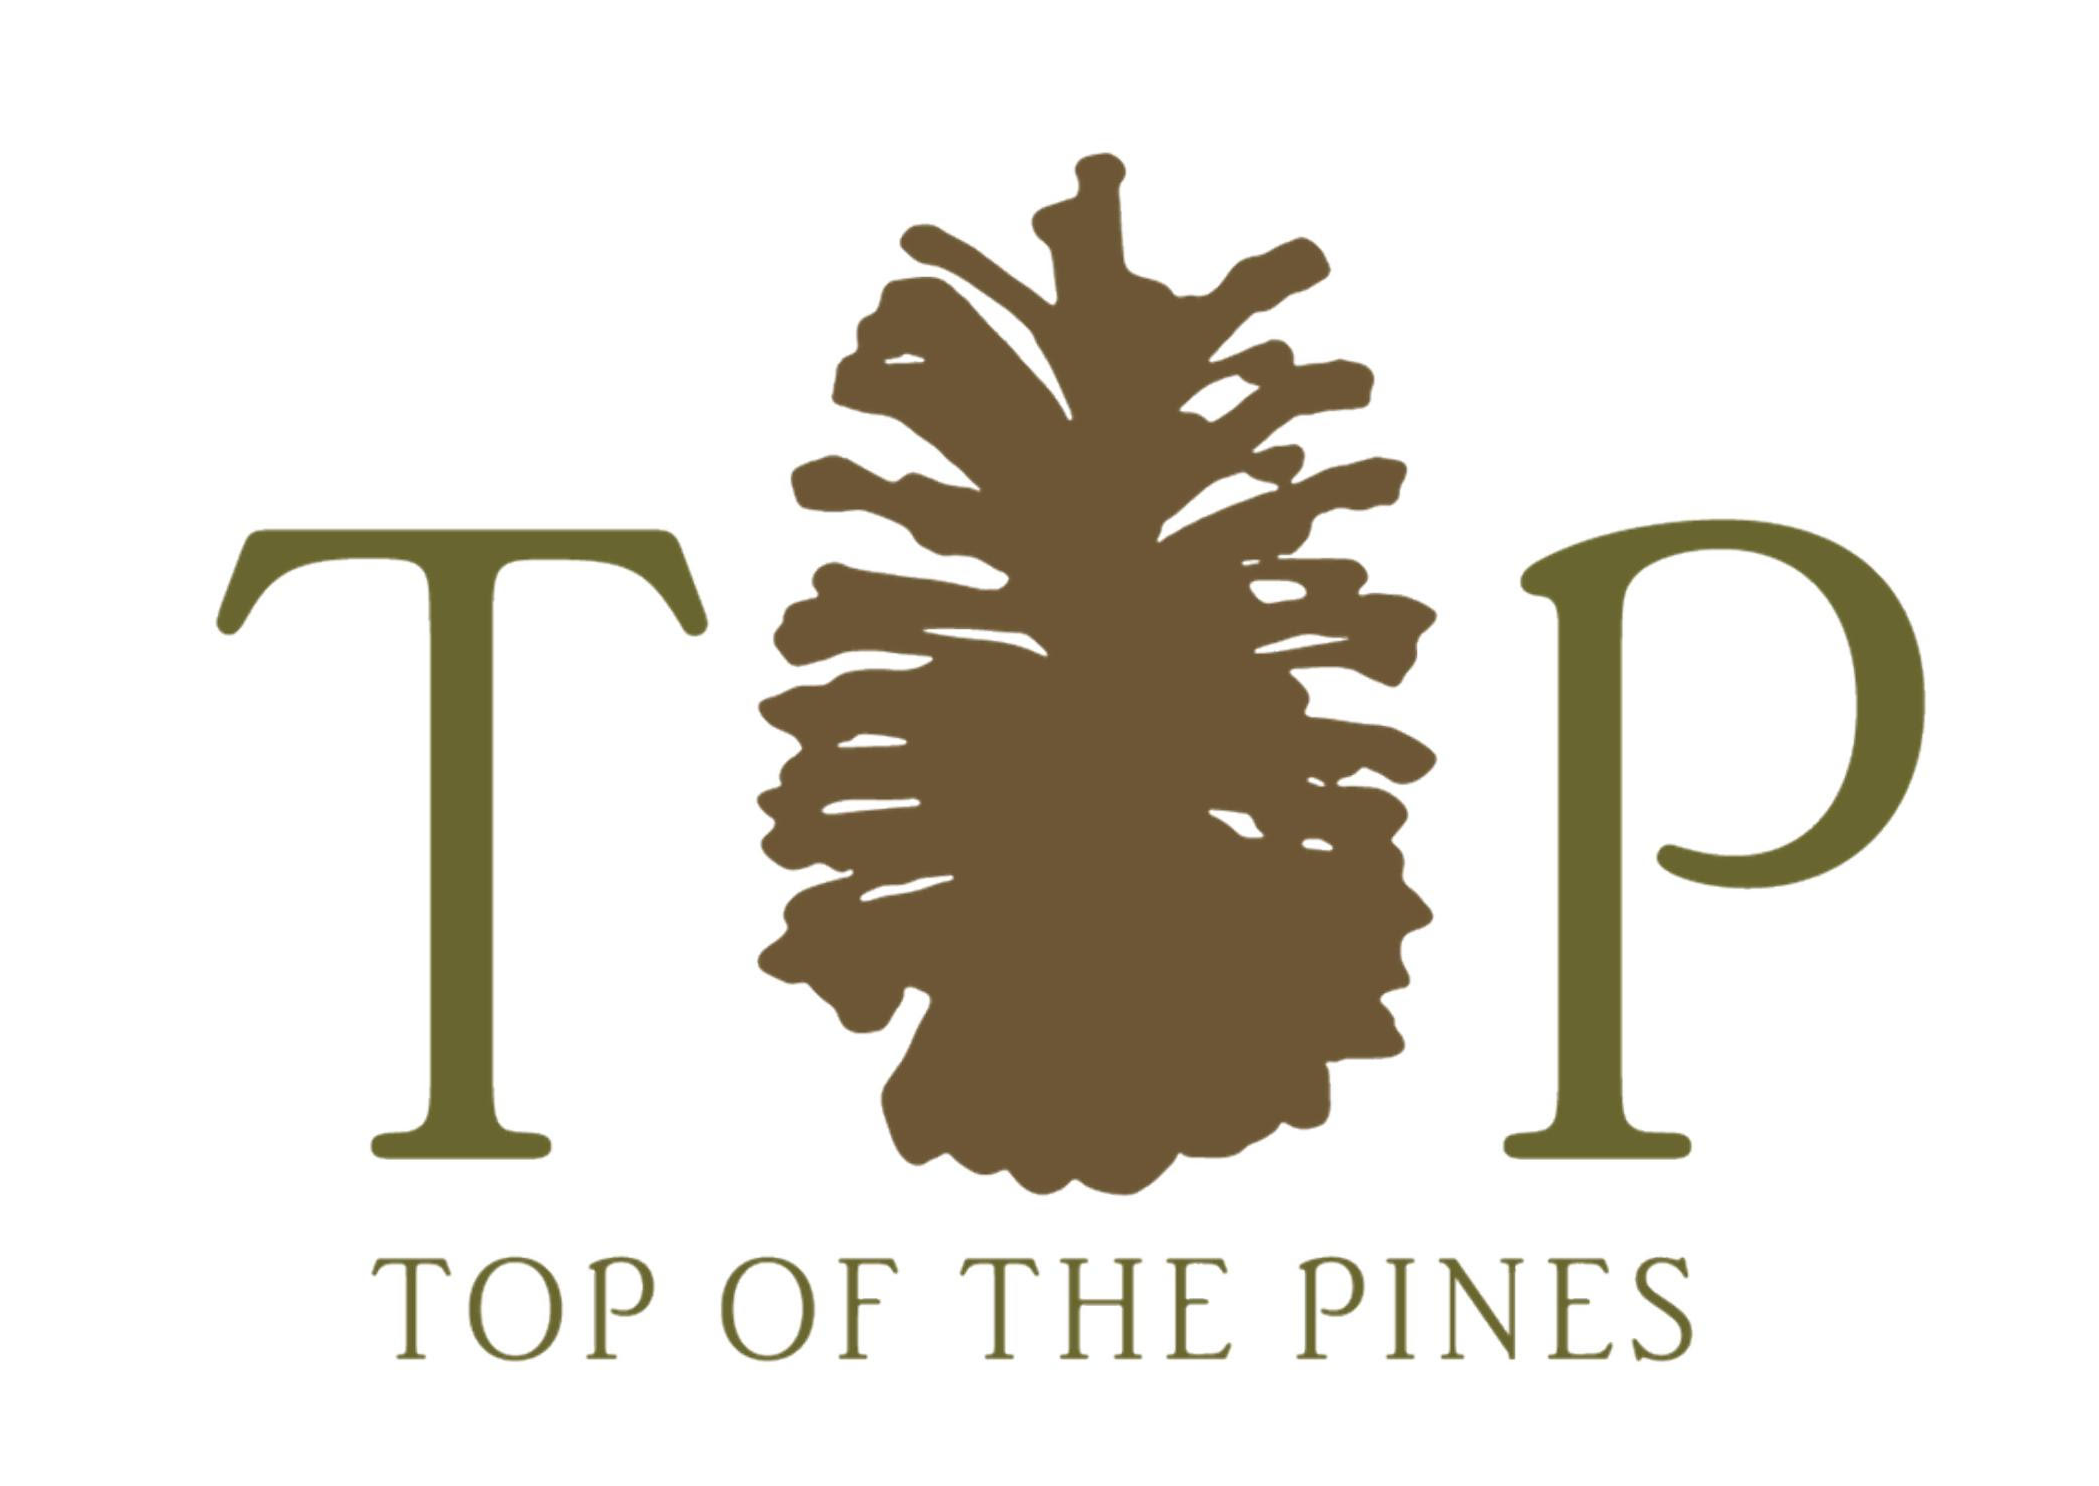 Top of the Pines logo